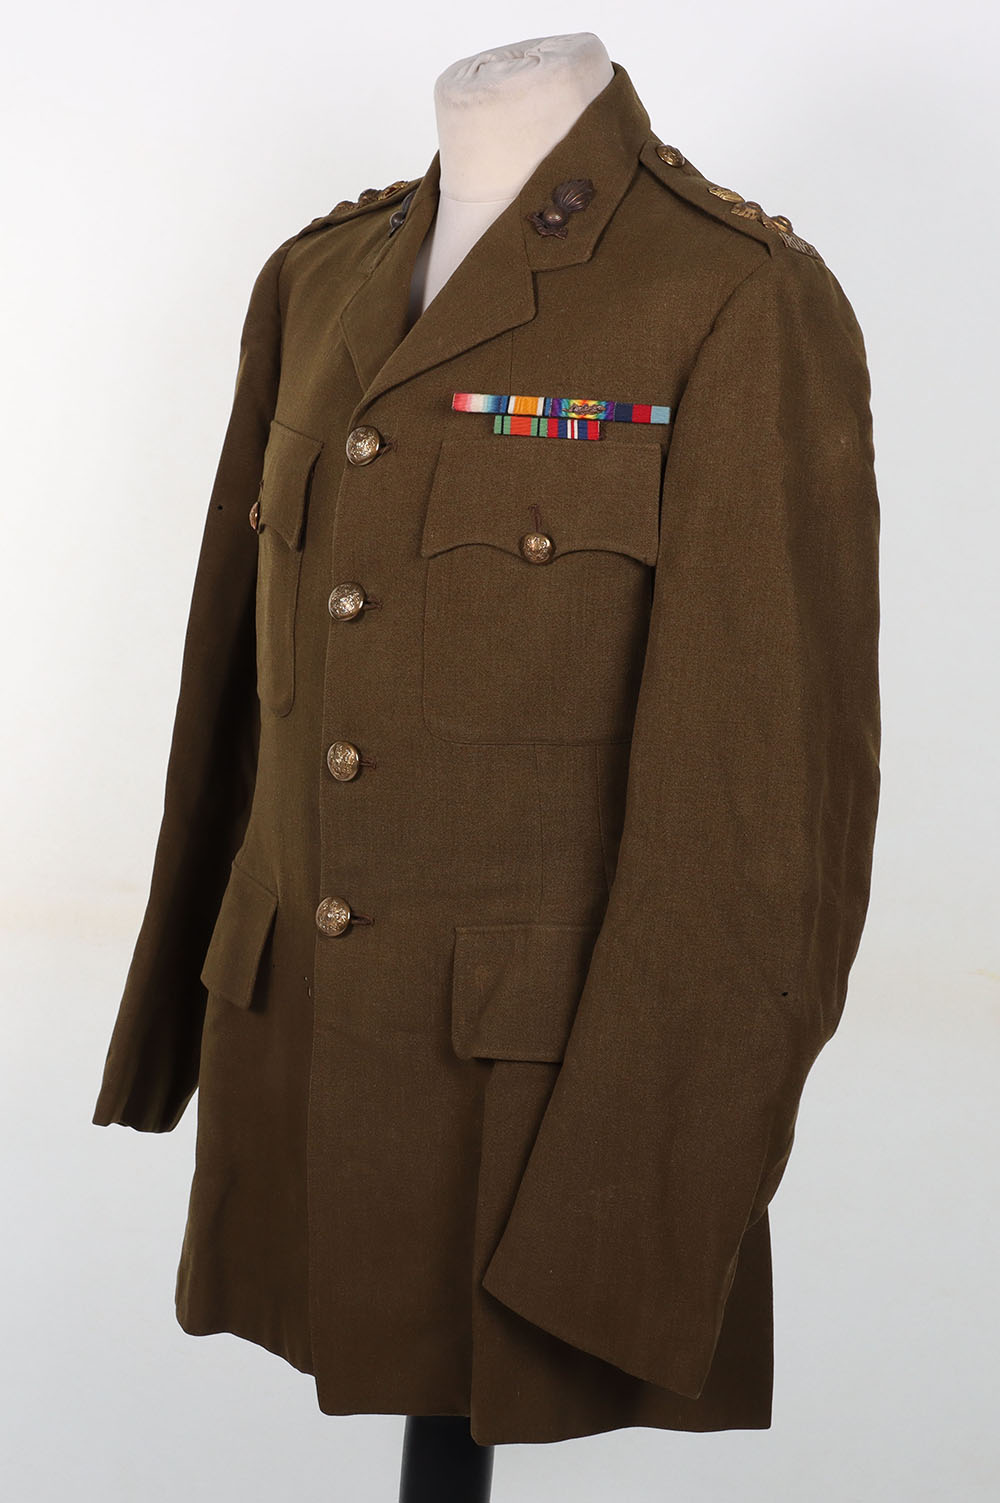 WW2 British Officers Service Dress Tunic of Colonel Robert H Sims 2nd Battalion Royal Welch Fusilier - Image 4 of 7